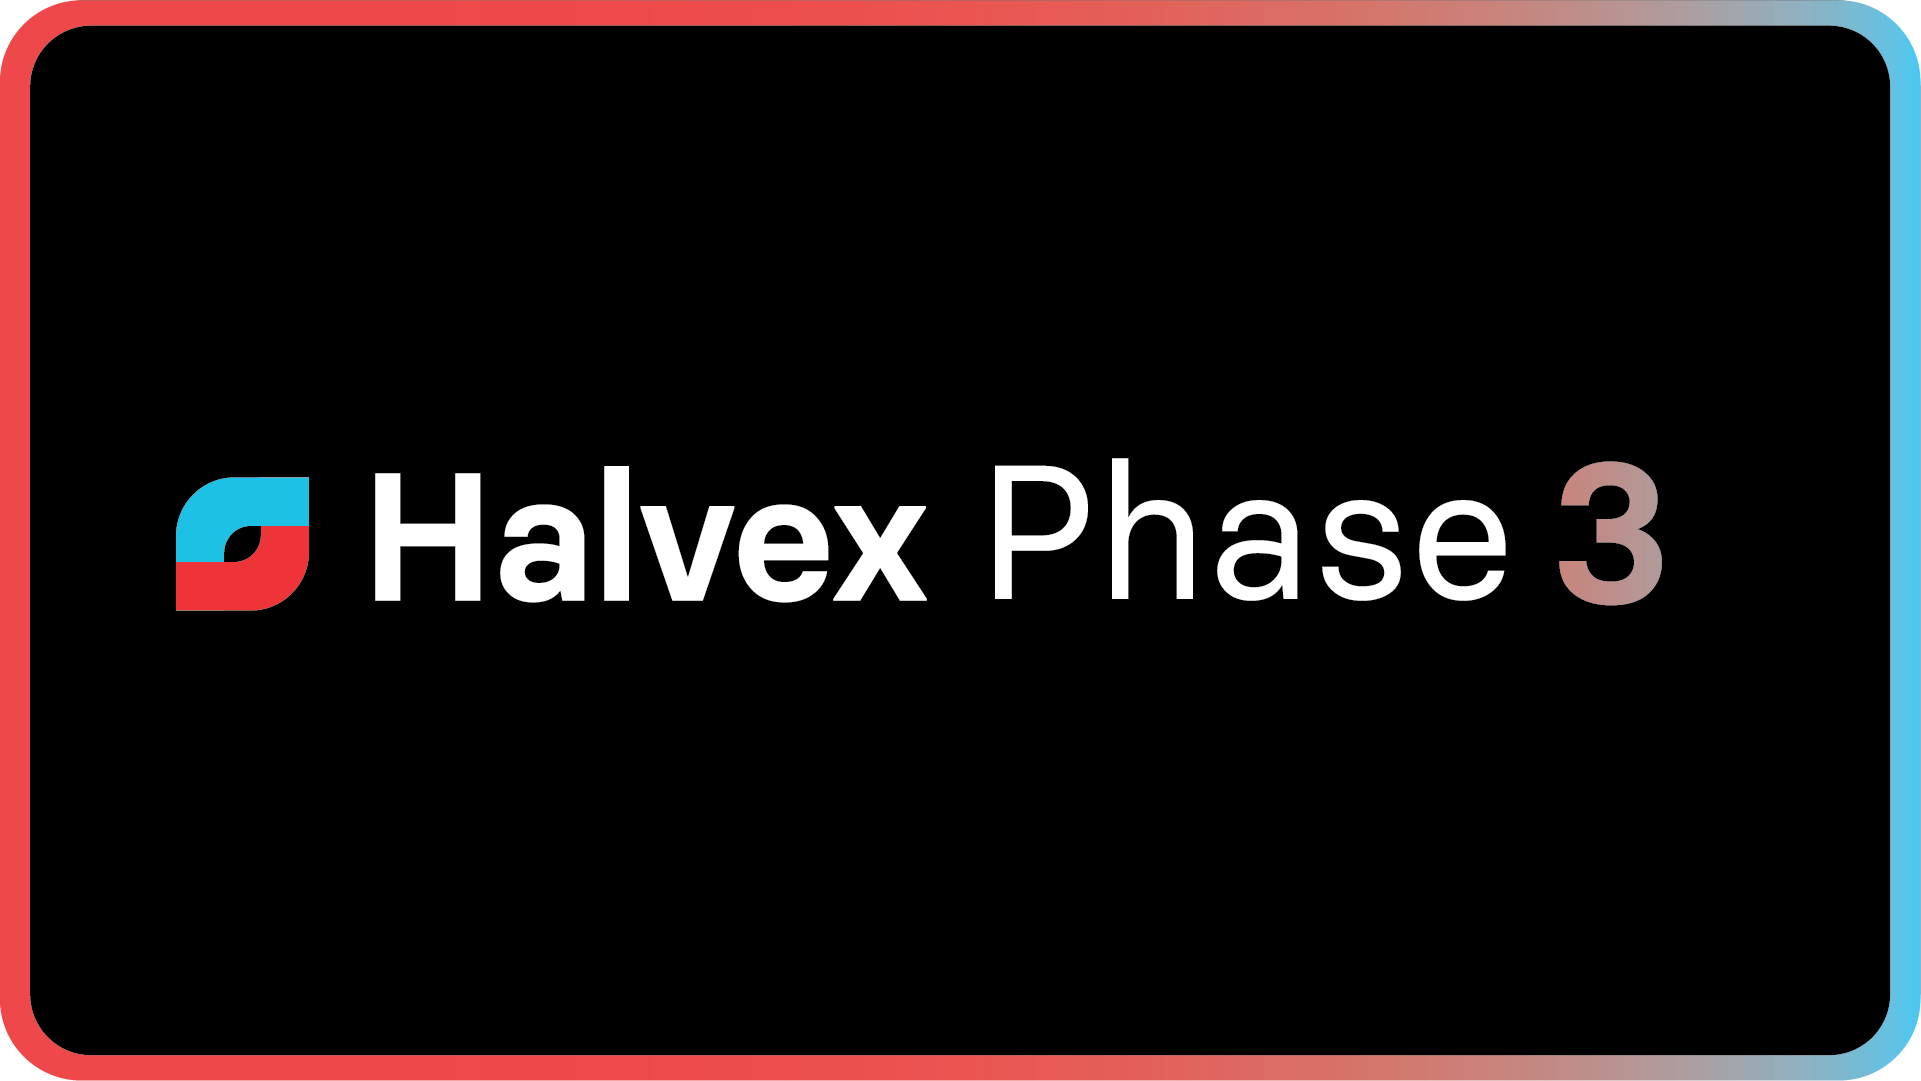 Welcome to Halvex Phase 3: New Look, New Things!